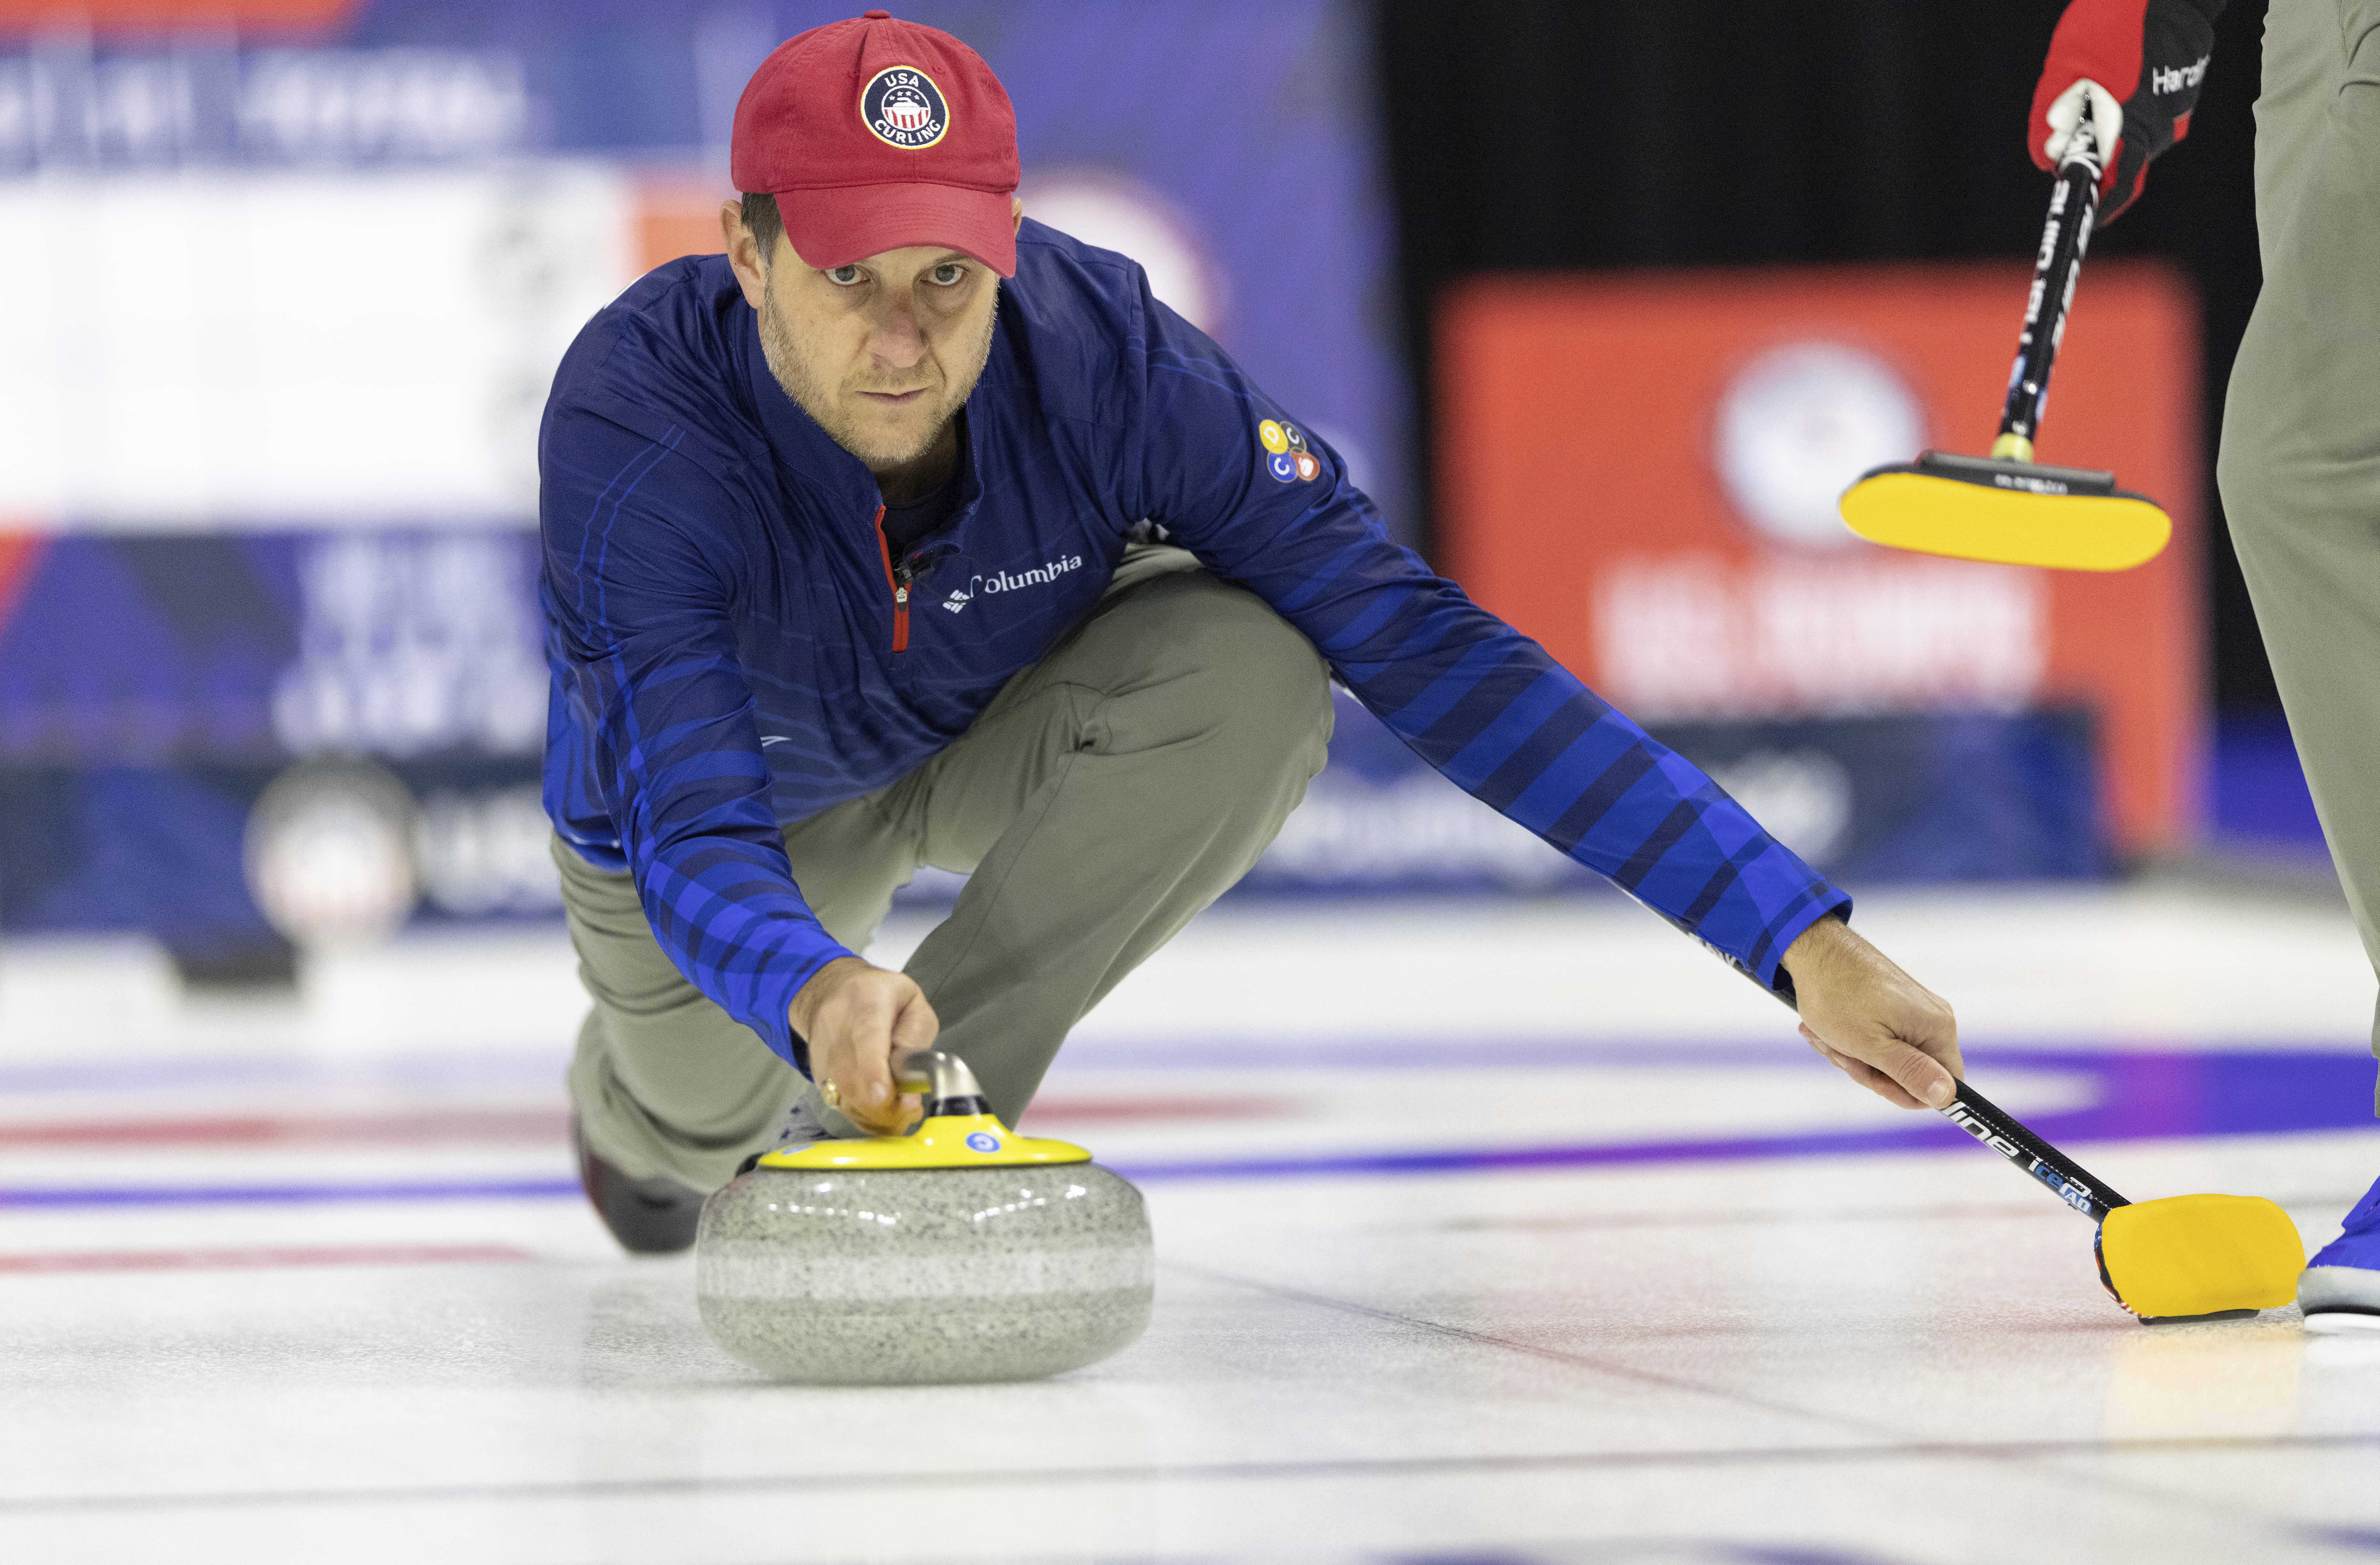 How to watch curling in Winter Olympics 2022 Live stream options, dates